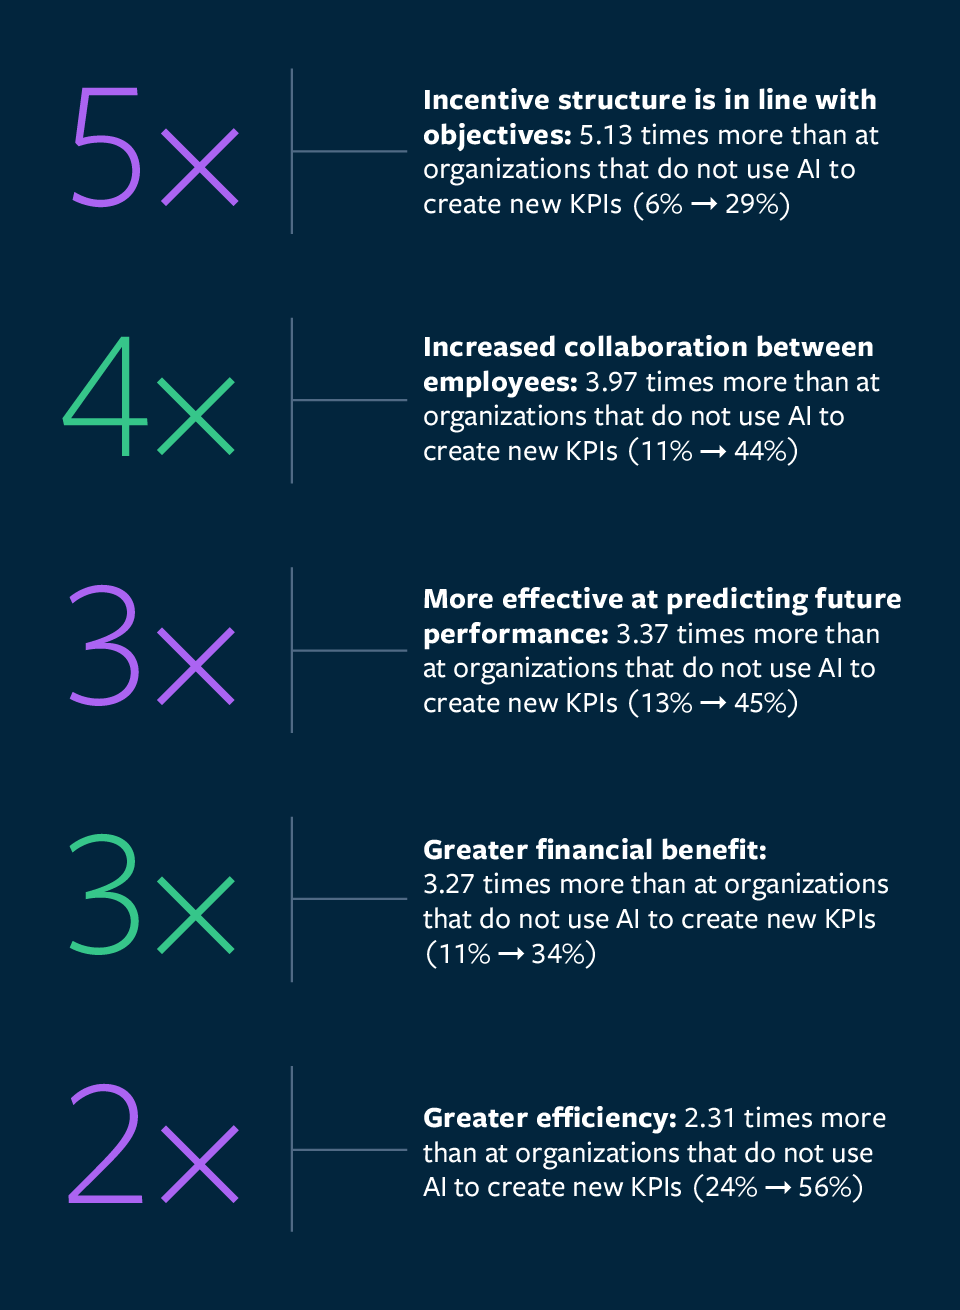 5x Incentive structure is in line with objectives; 3x Increased collaboration between employees; 3x More effective at predicting future performance; 3x Greater financial benefit; 2x Greater efficiency